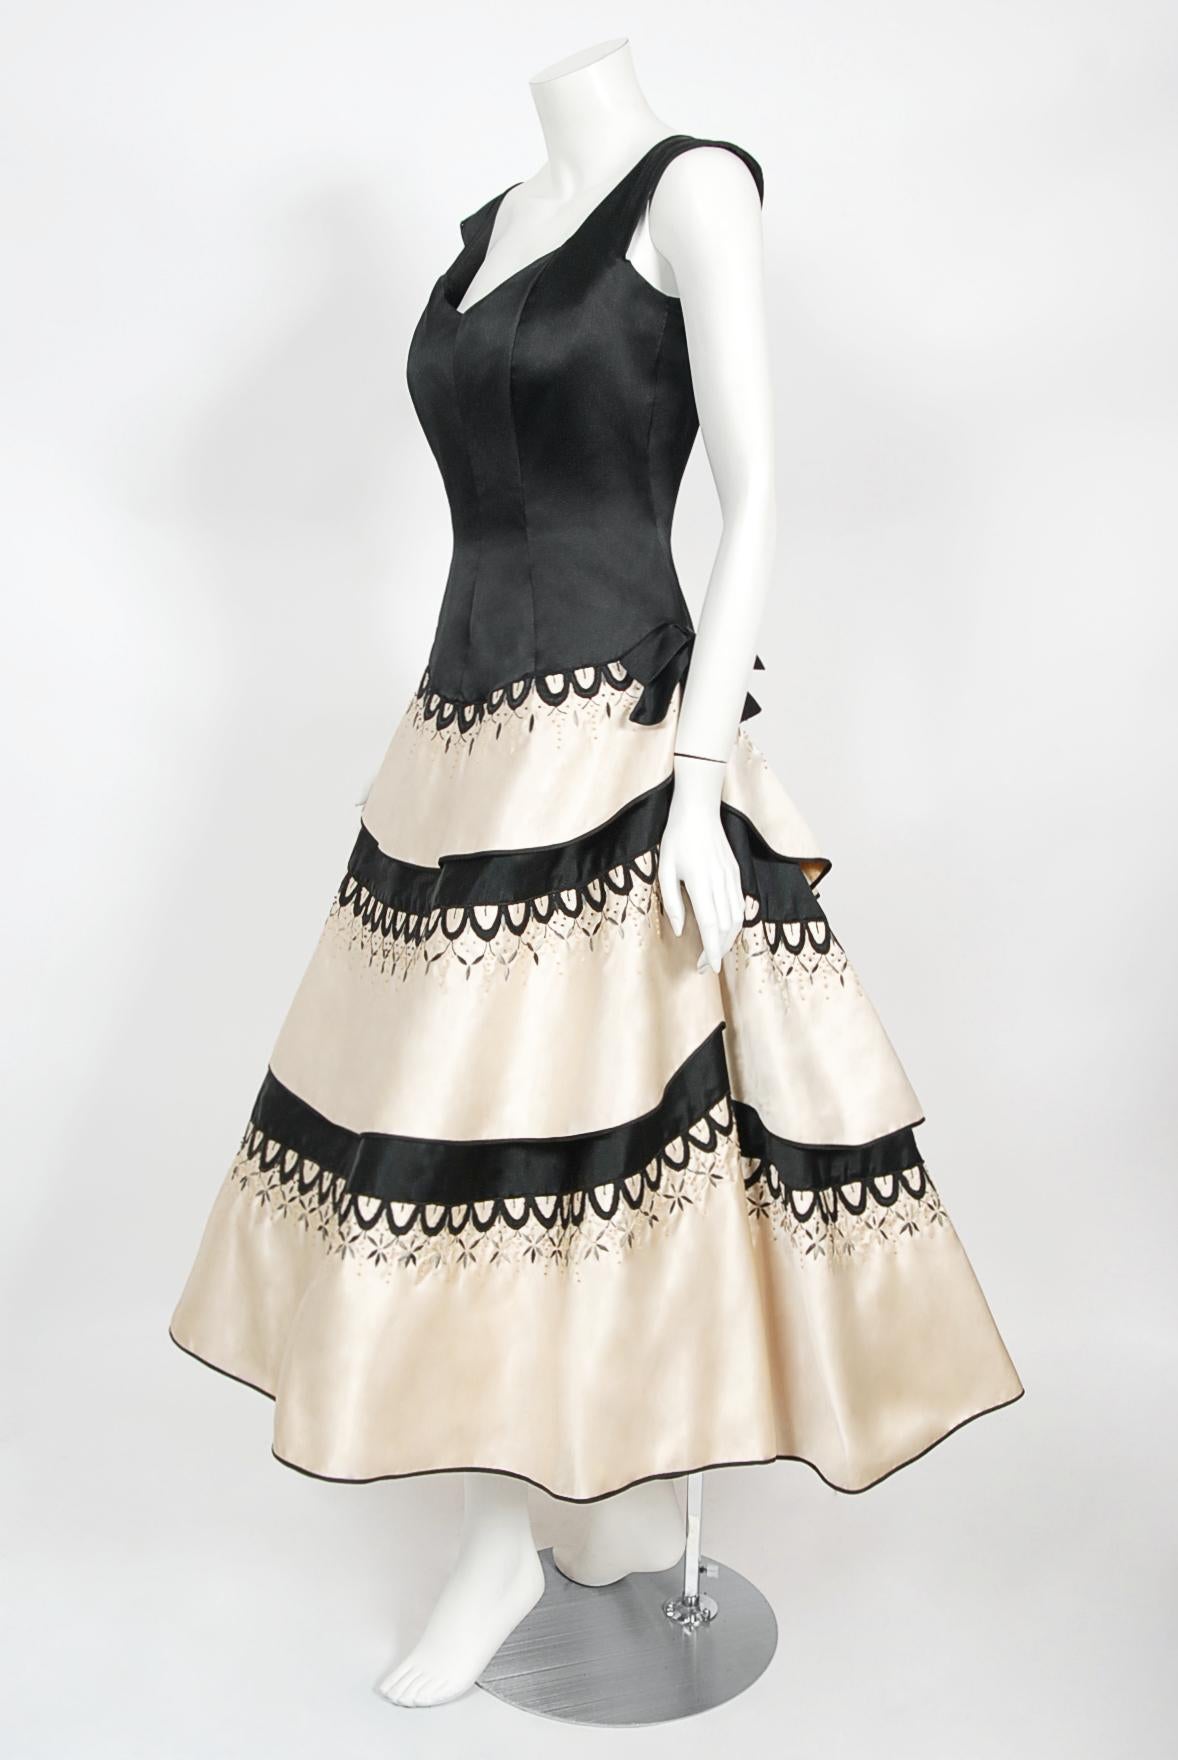 Vintage 1950's Emilio Schuberth Couture Black & Ivory Embroidered Satin Dress For Sale 4